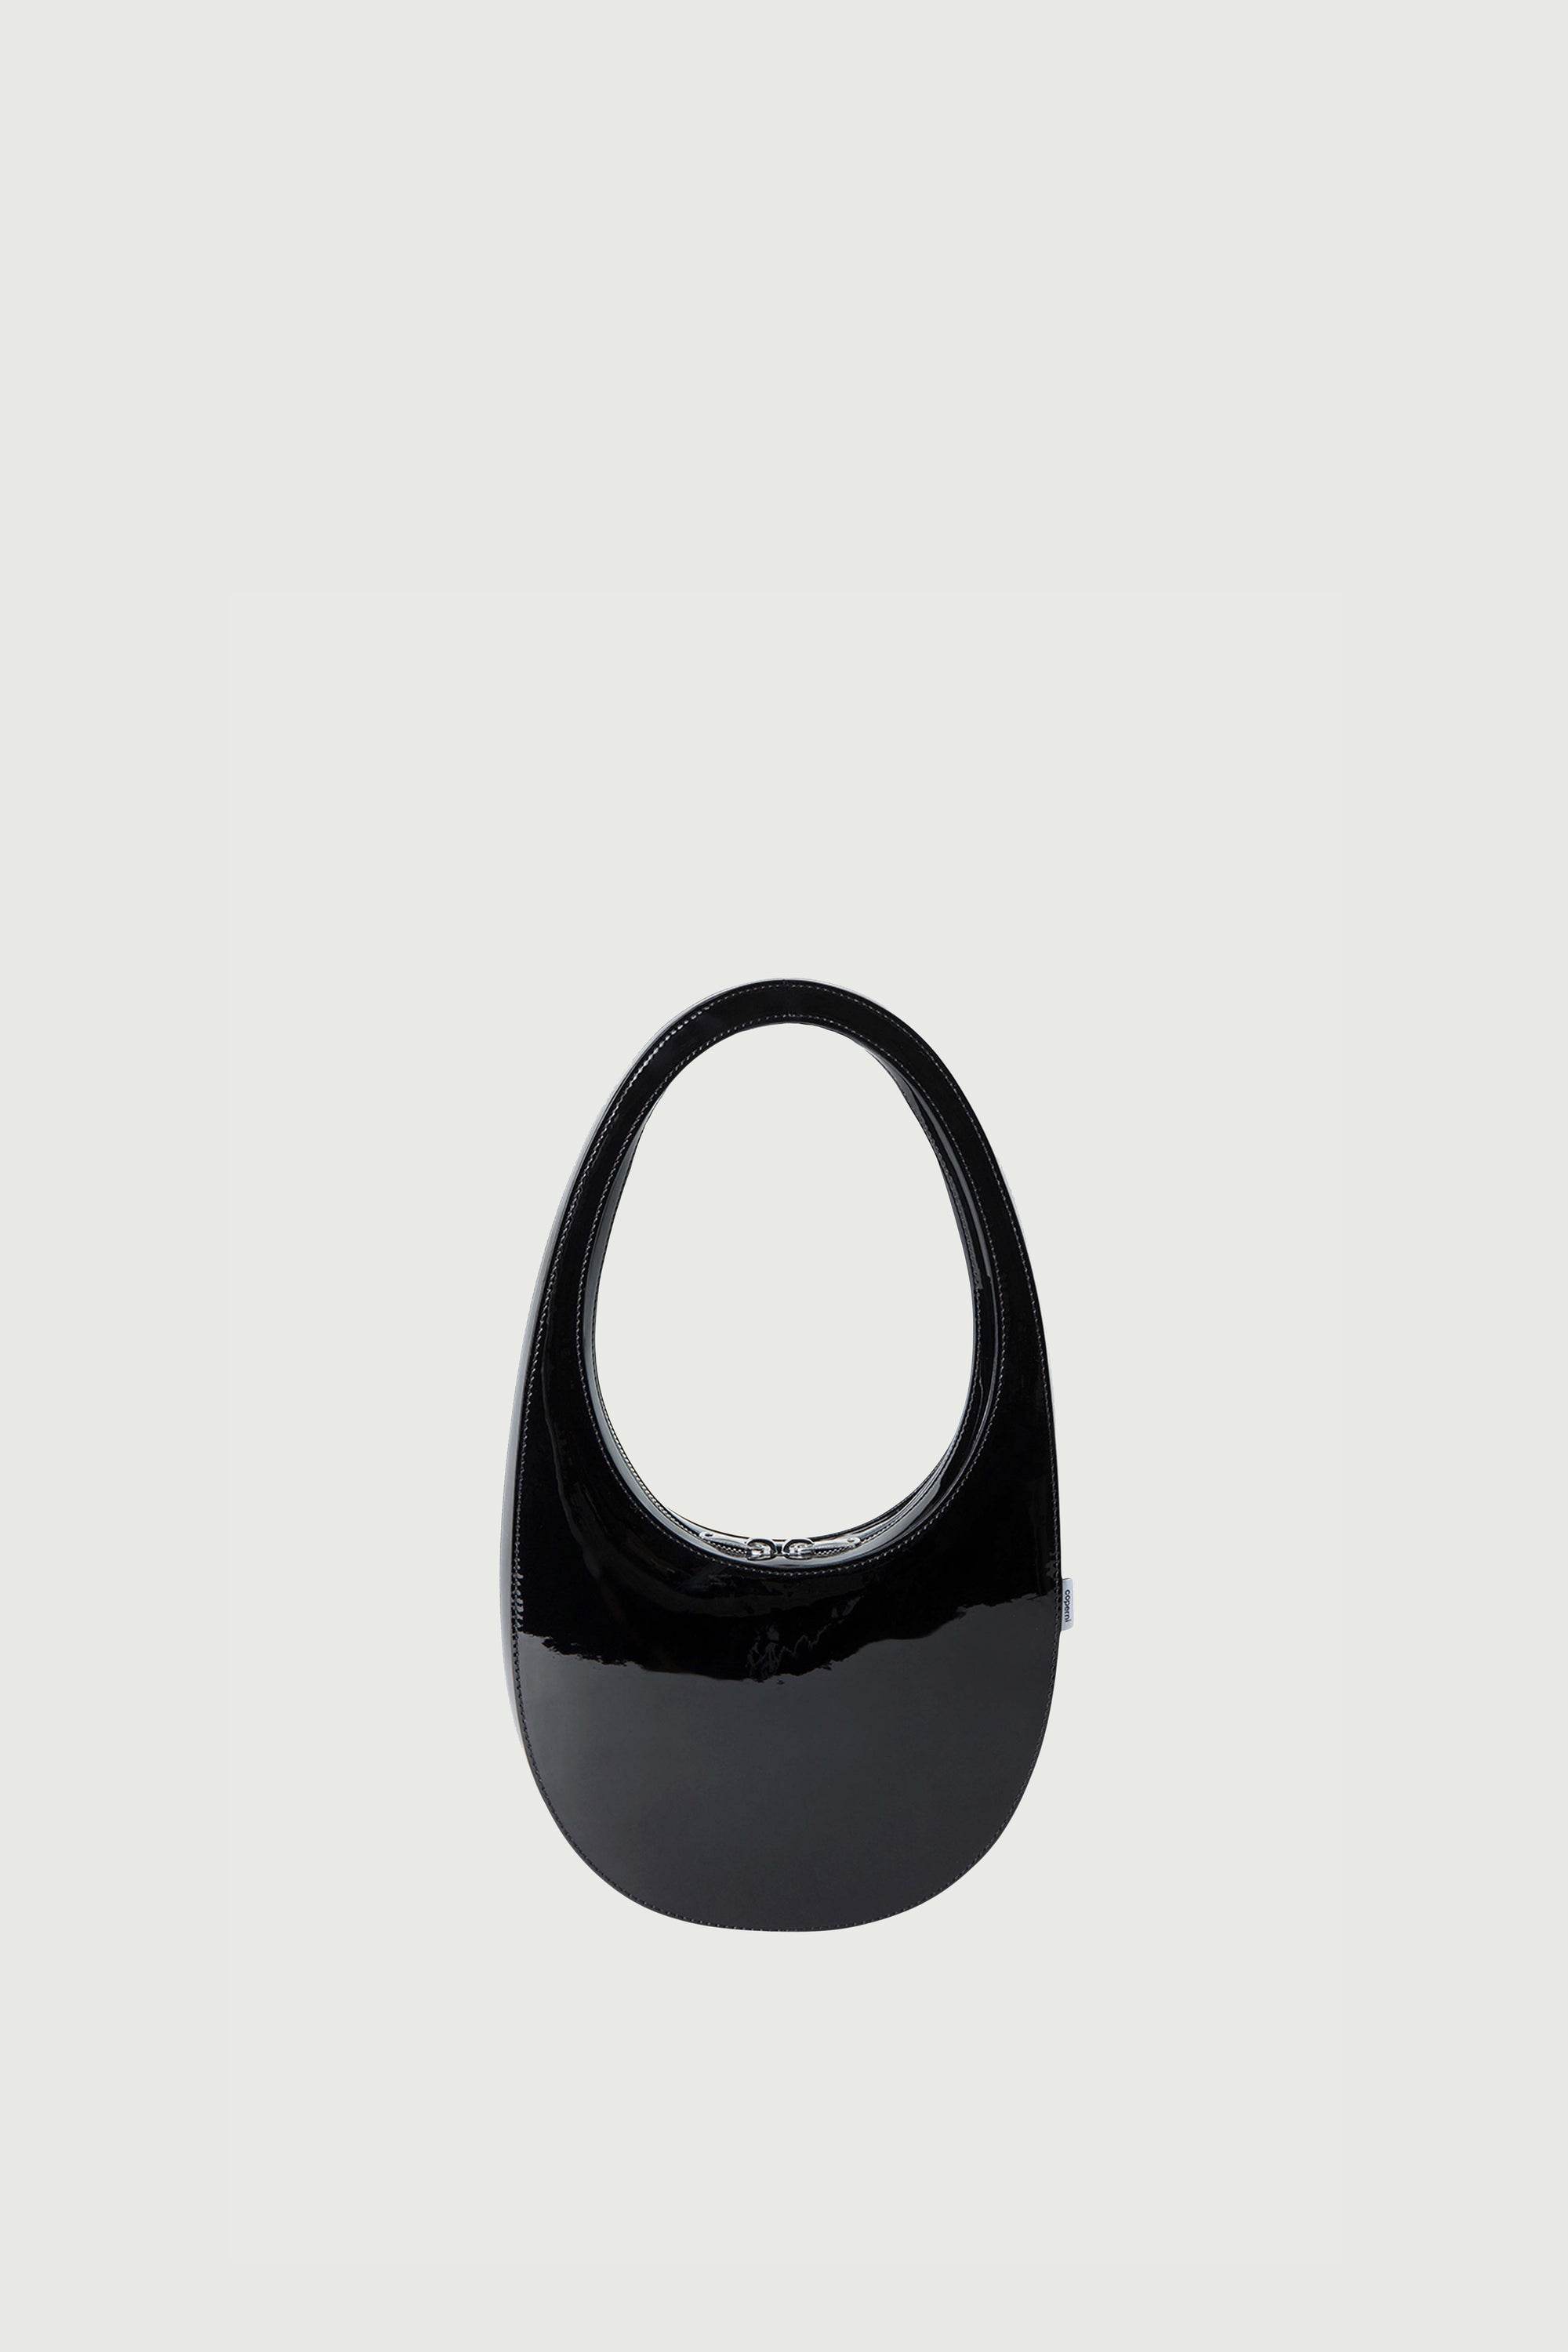 Now craving: Coperni bags (by Sébastien Meyer and Arnaud Vaillant)